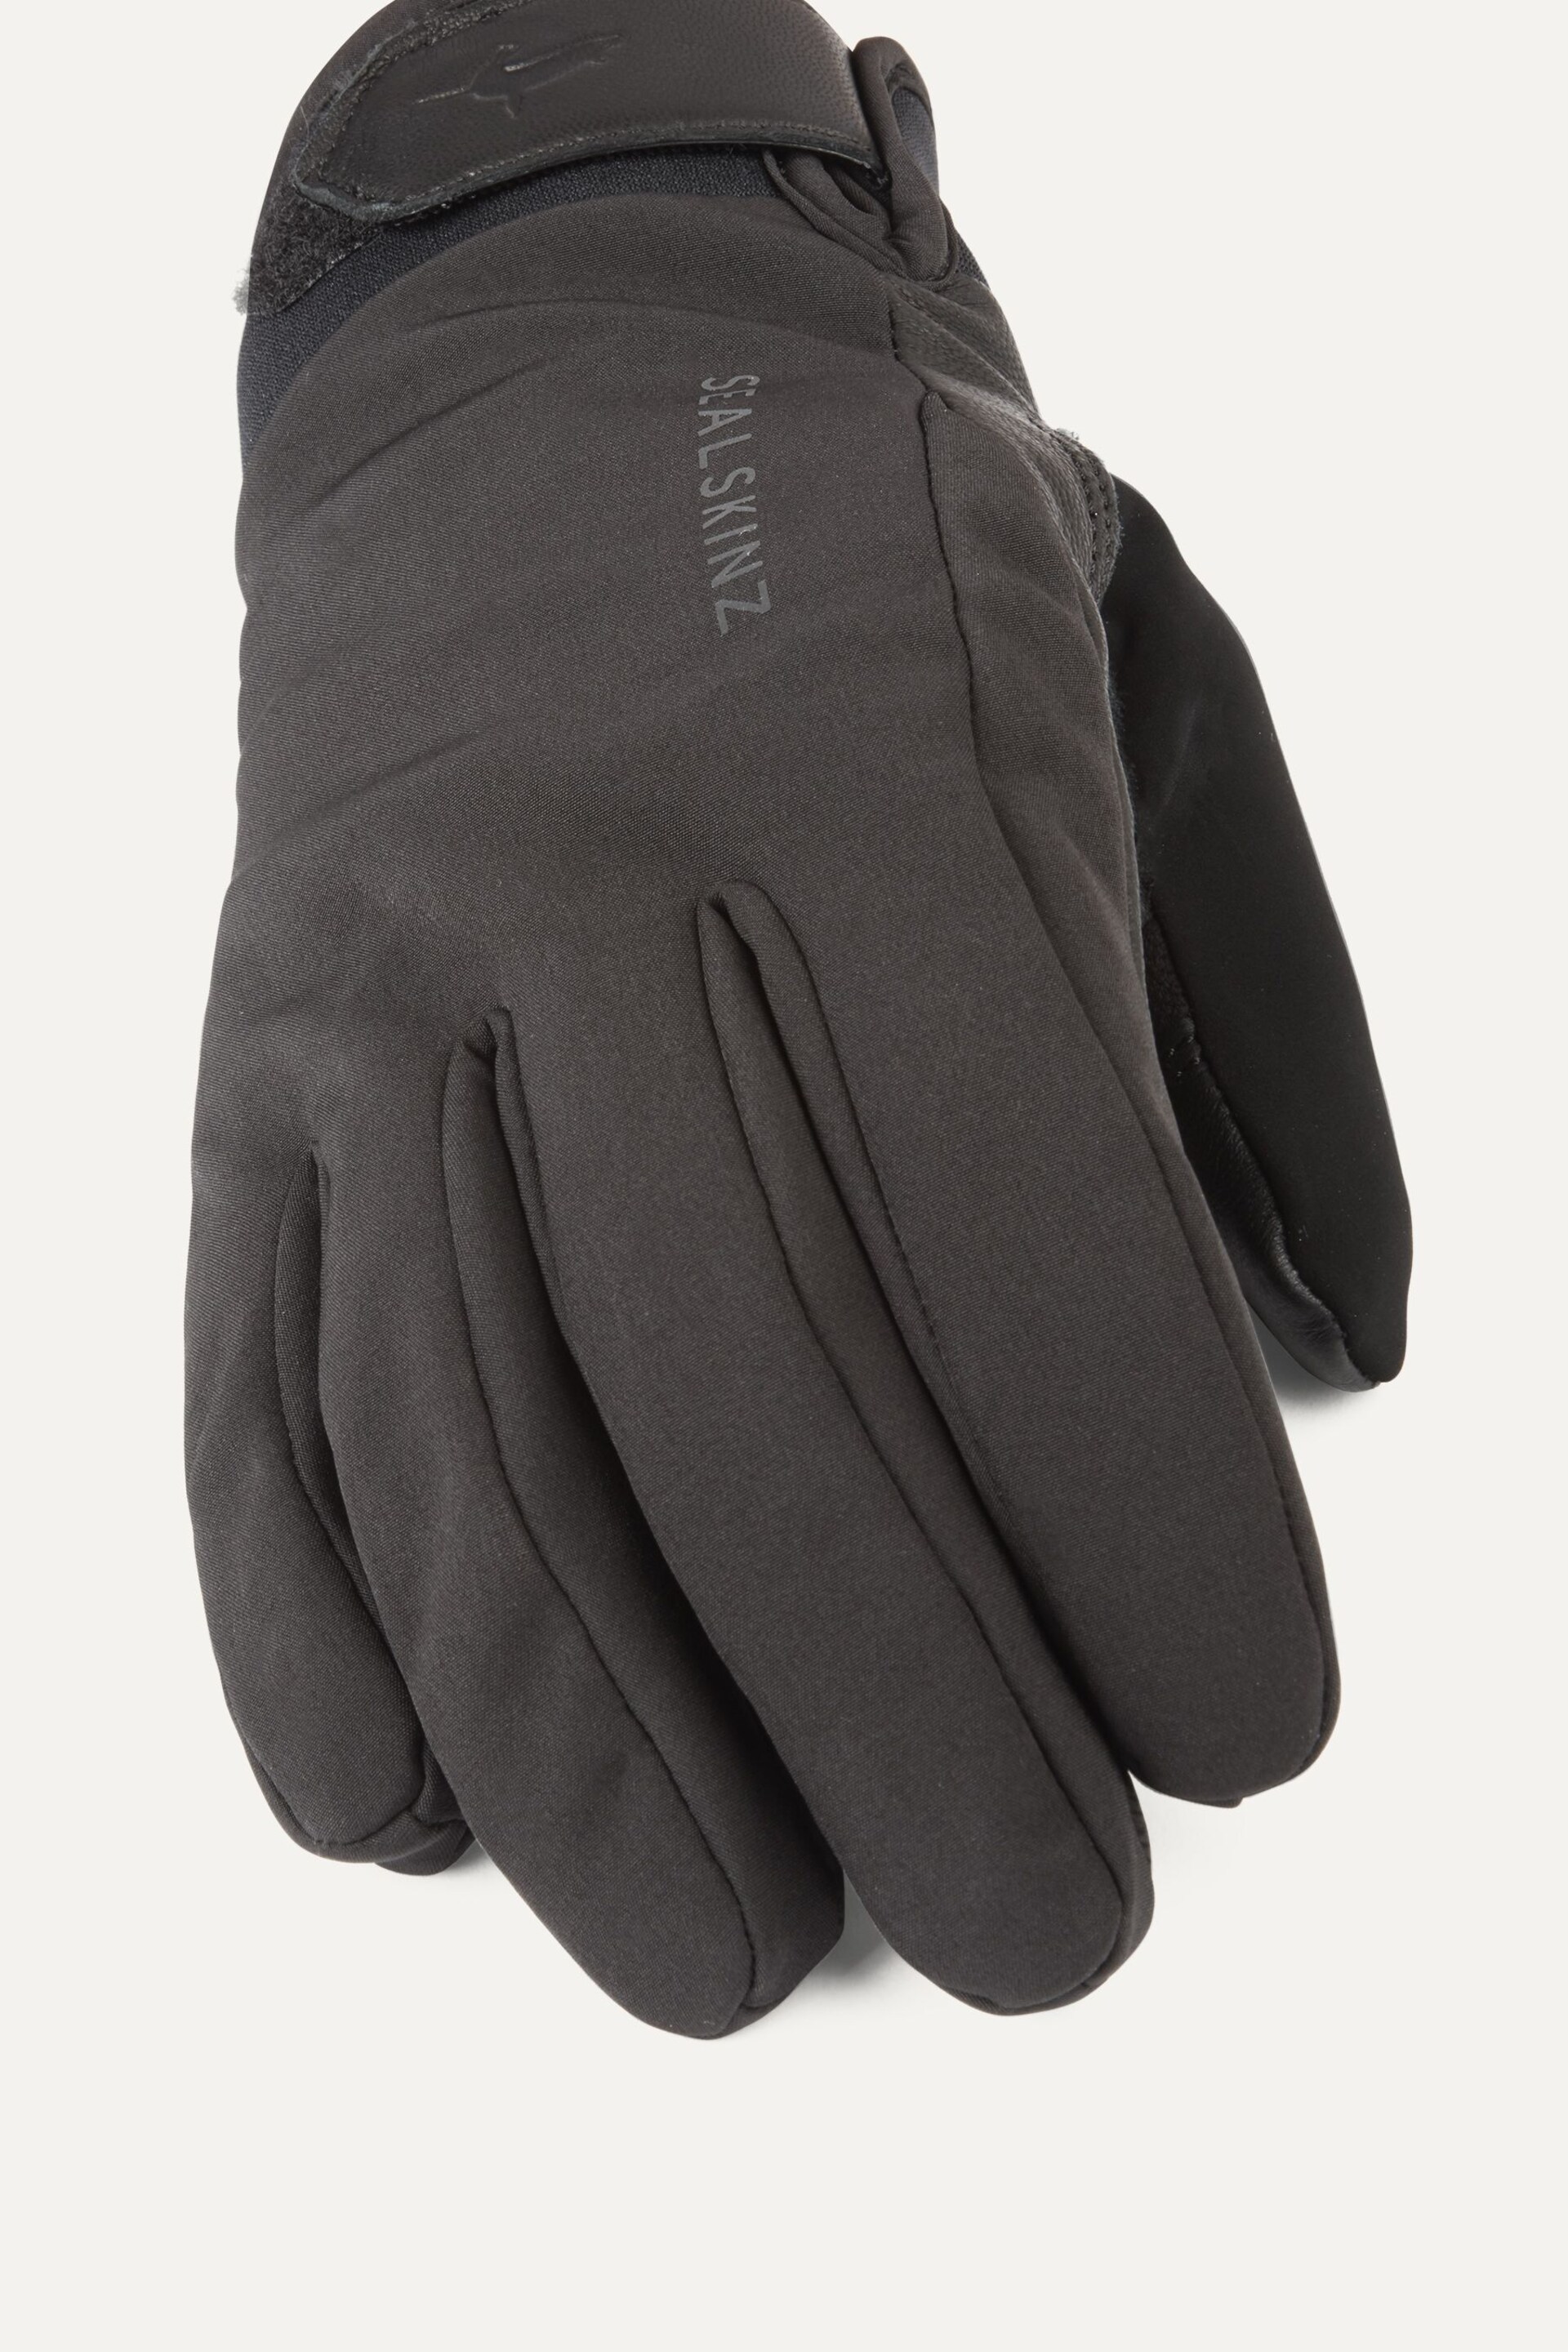 Sealskinz Kelling Women{Sq}S Waterproof All Weather Insulated Glove - Image 3 of 3